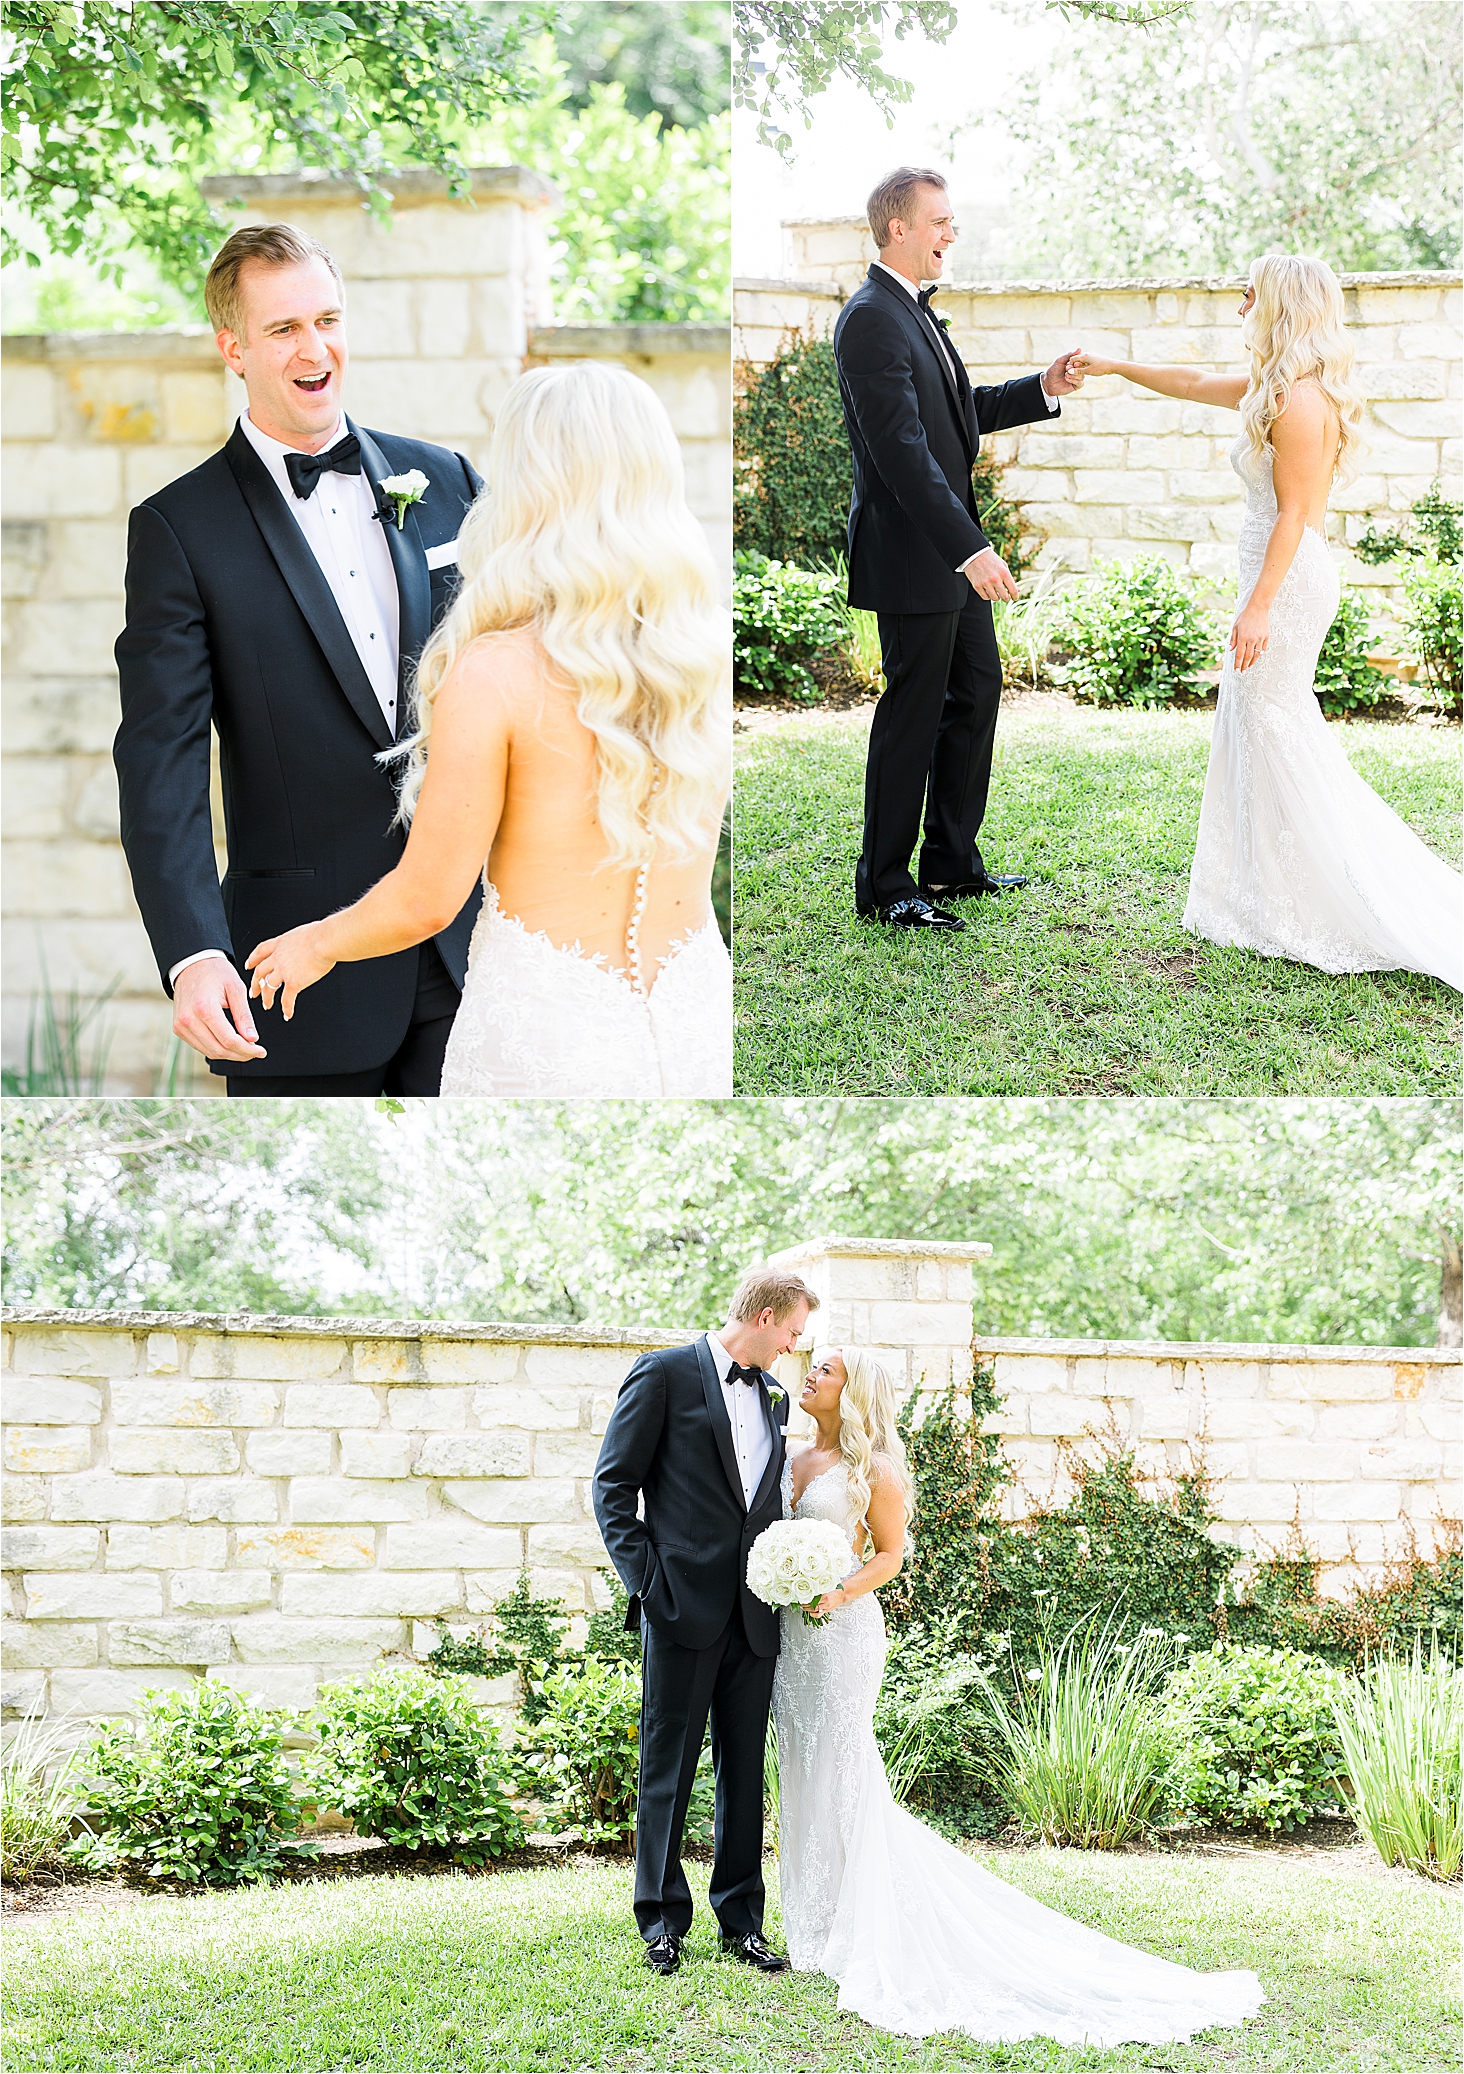 A groom in a black tux is surprised and happy as he sees his blonde bride in a lace wedding dress for the first time as they are surrounded by greenery at Brodie Homestead in Austin, Texas